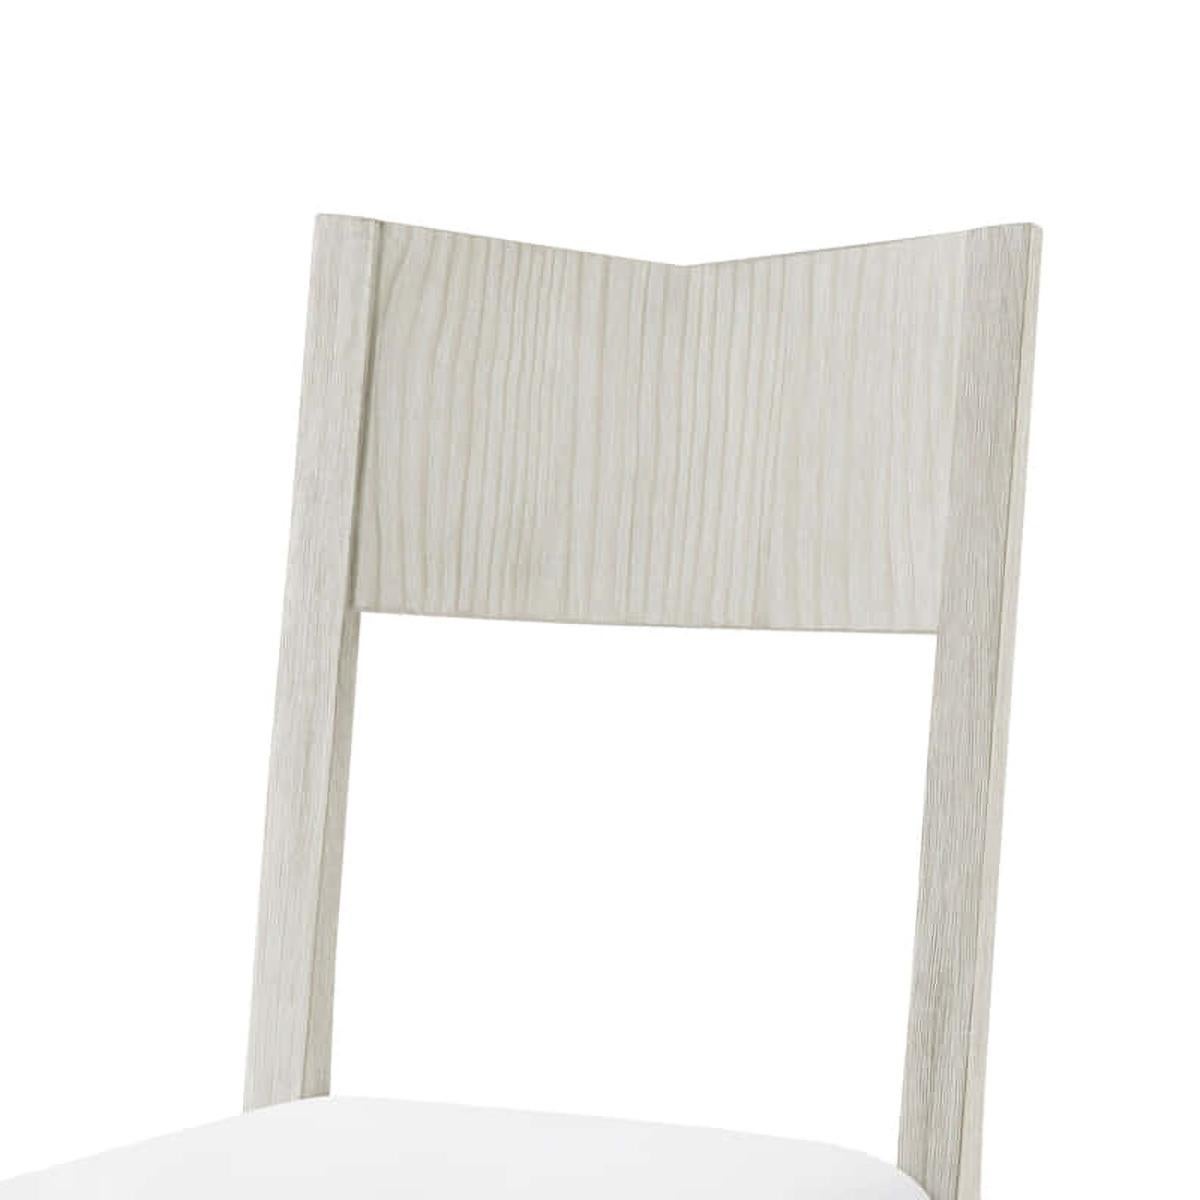 Modern painted dining chair, designed with a beveled back, incredibly comfortable seat crafted from wire-brushed cerused pine in our Sea Salt finish.

Dimensions: 20.5